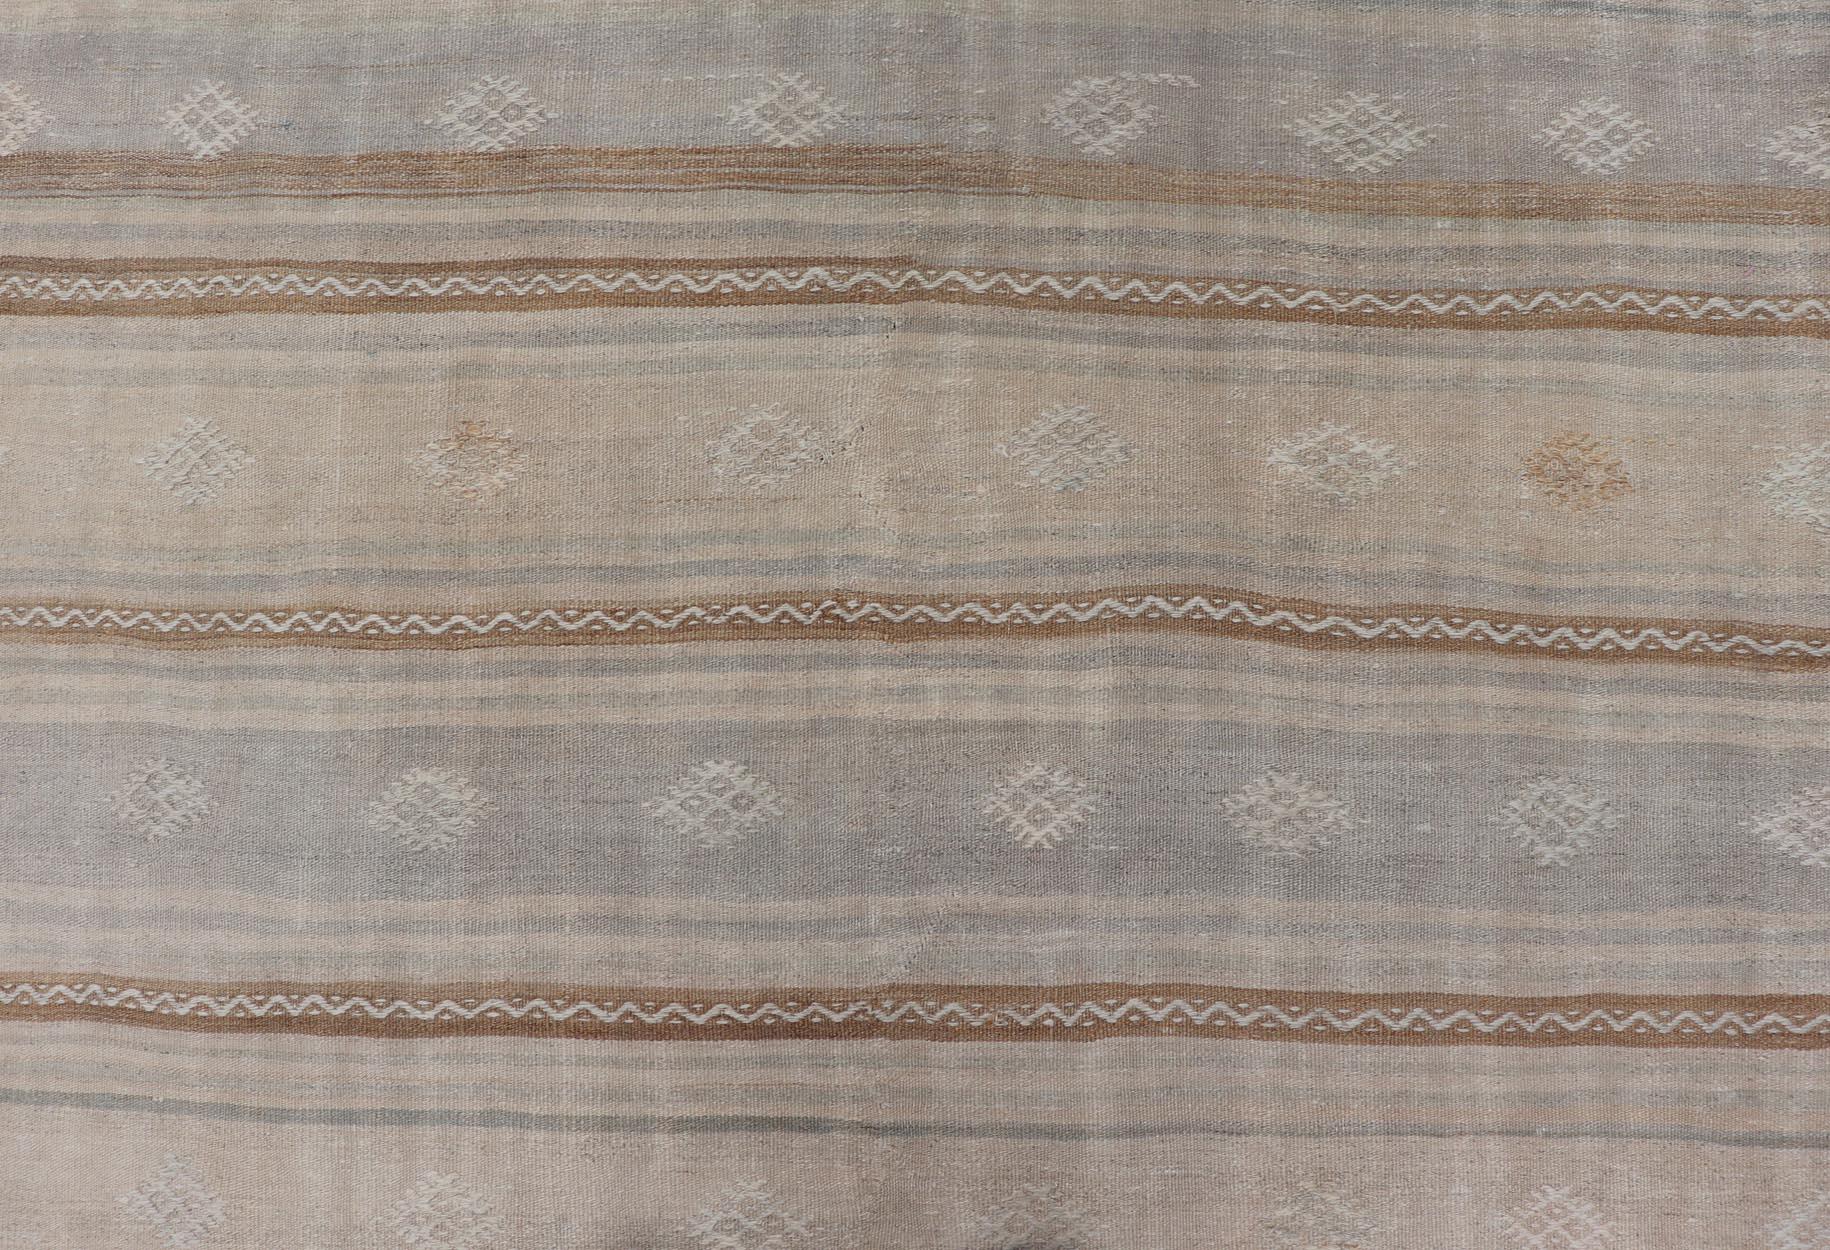 Turkish Flat-Weave Embroideries Kilim in Tan, Taupe, Brown and a Soft Blue For Sale 3